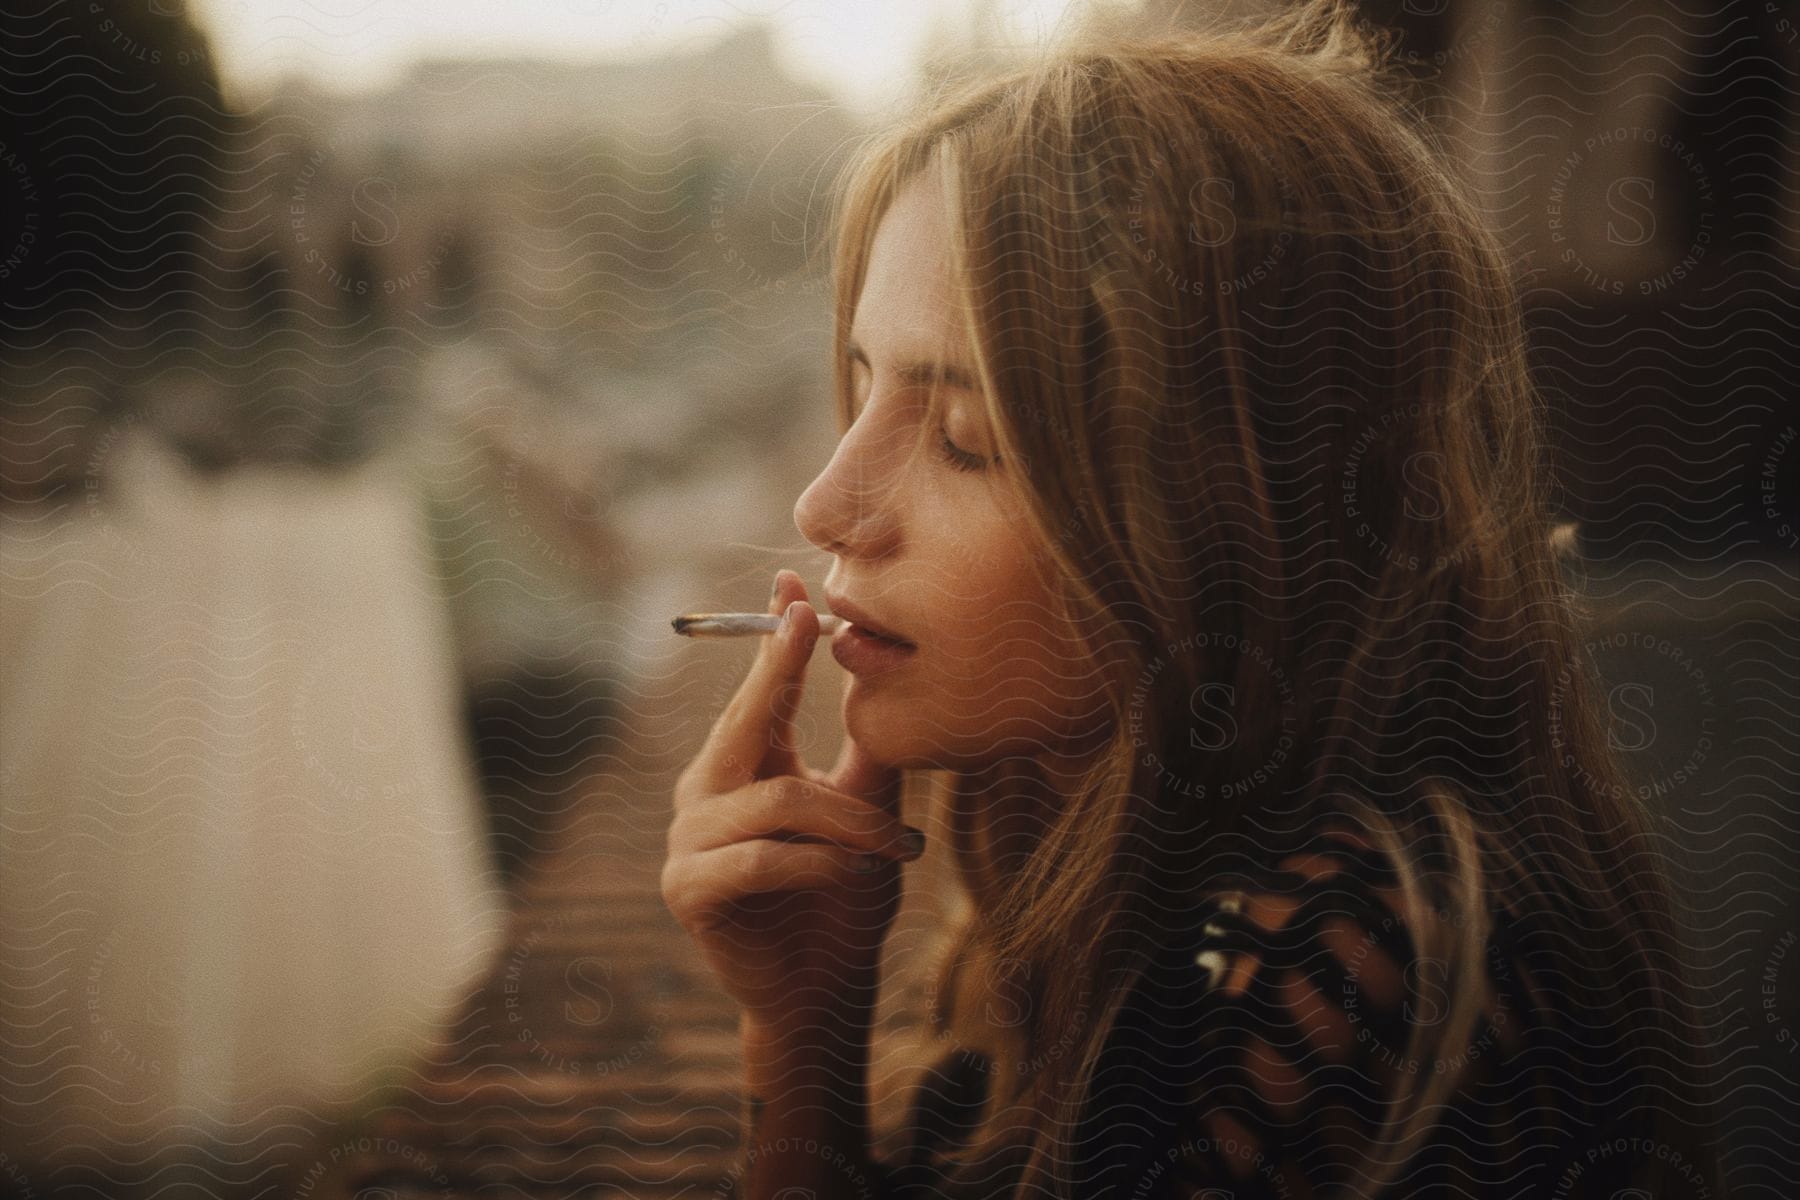 female smokes a joint, in profile, outdoors